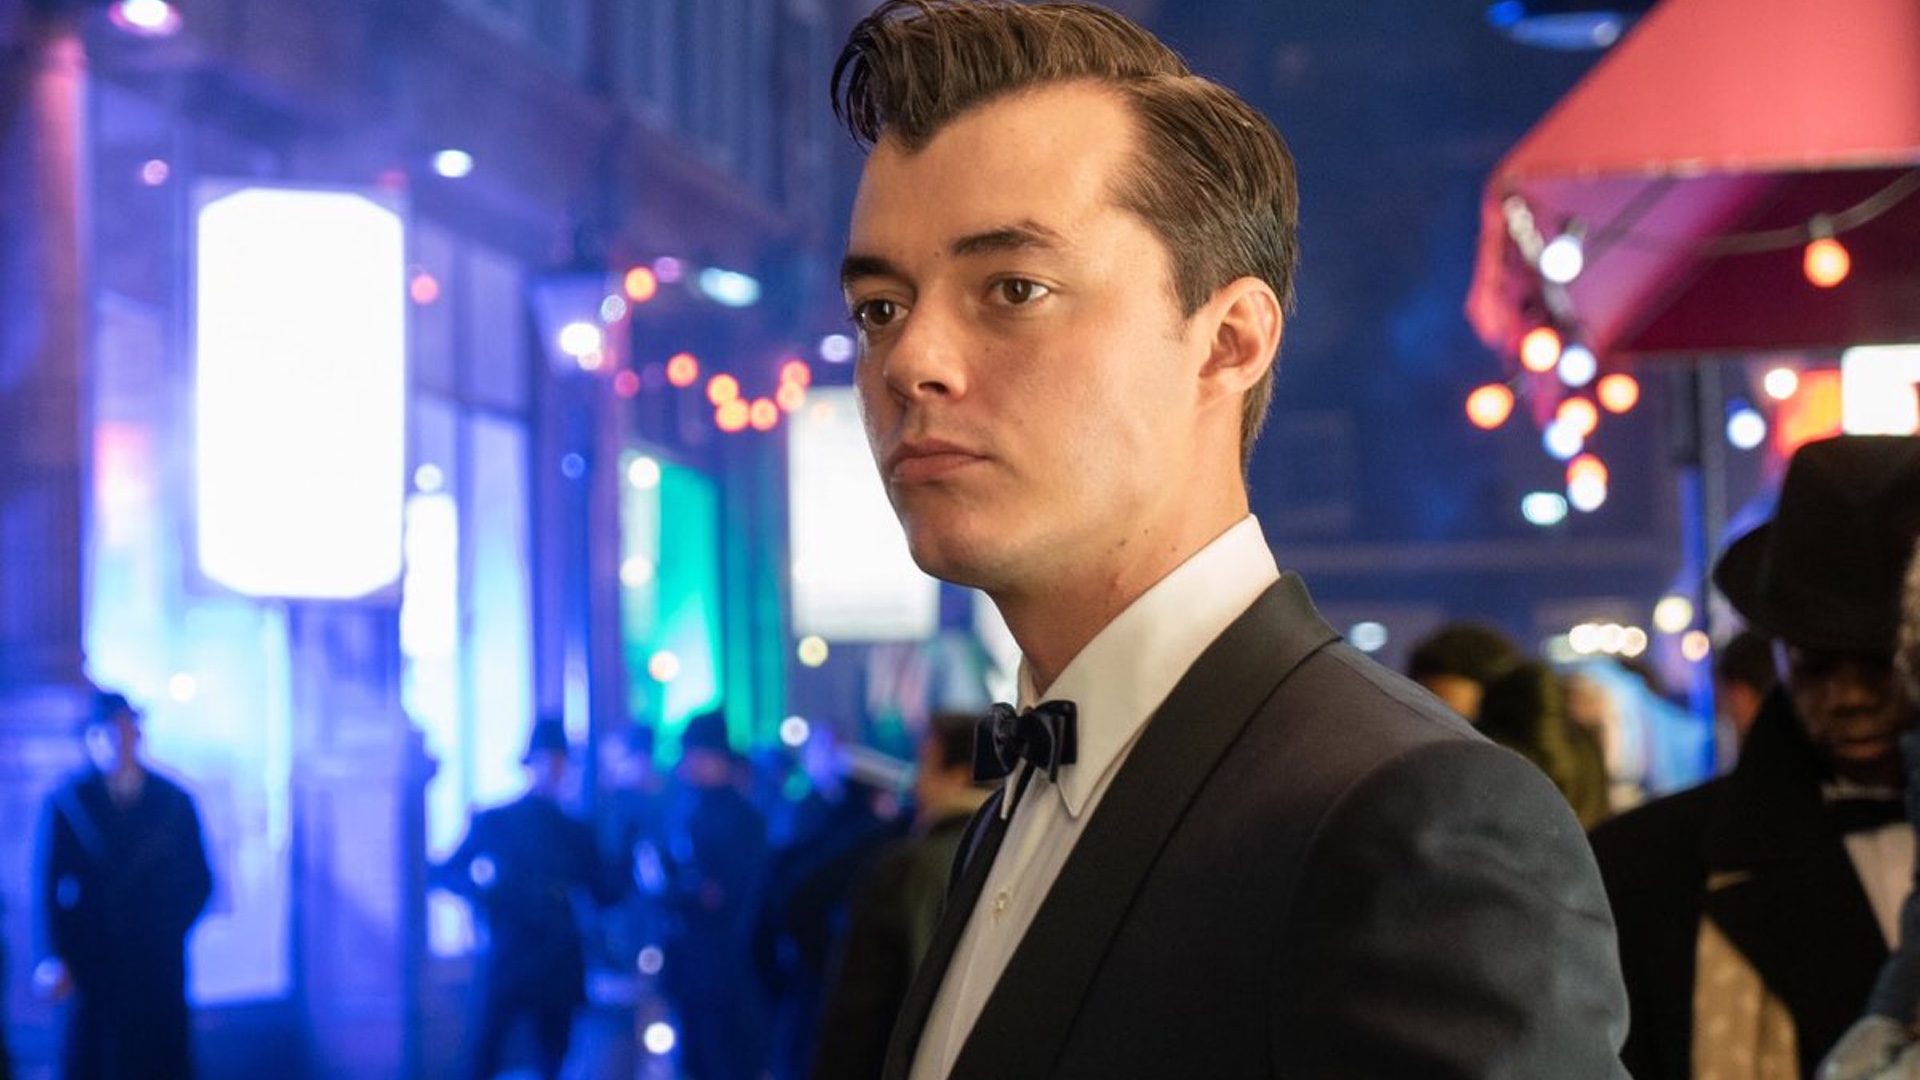 Batman Prequel Pennyworth release date is set for July 28th and will premiere on Epix